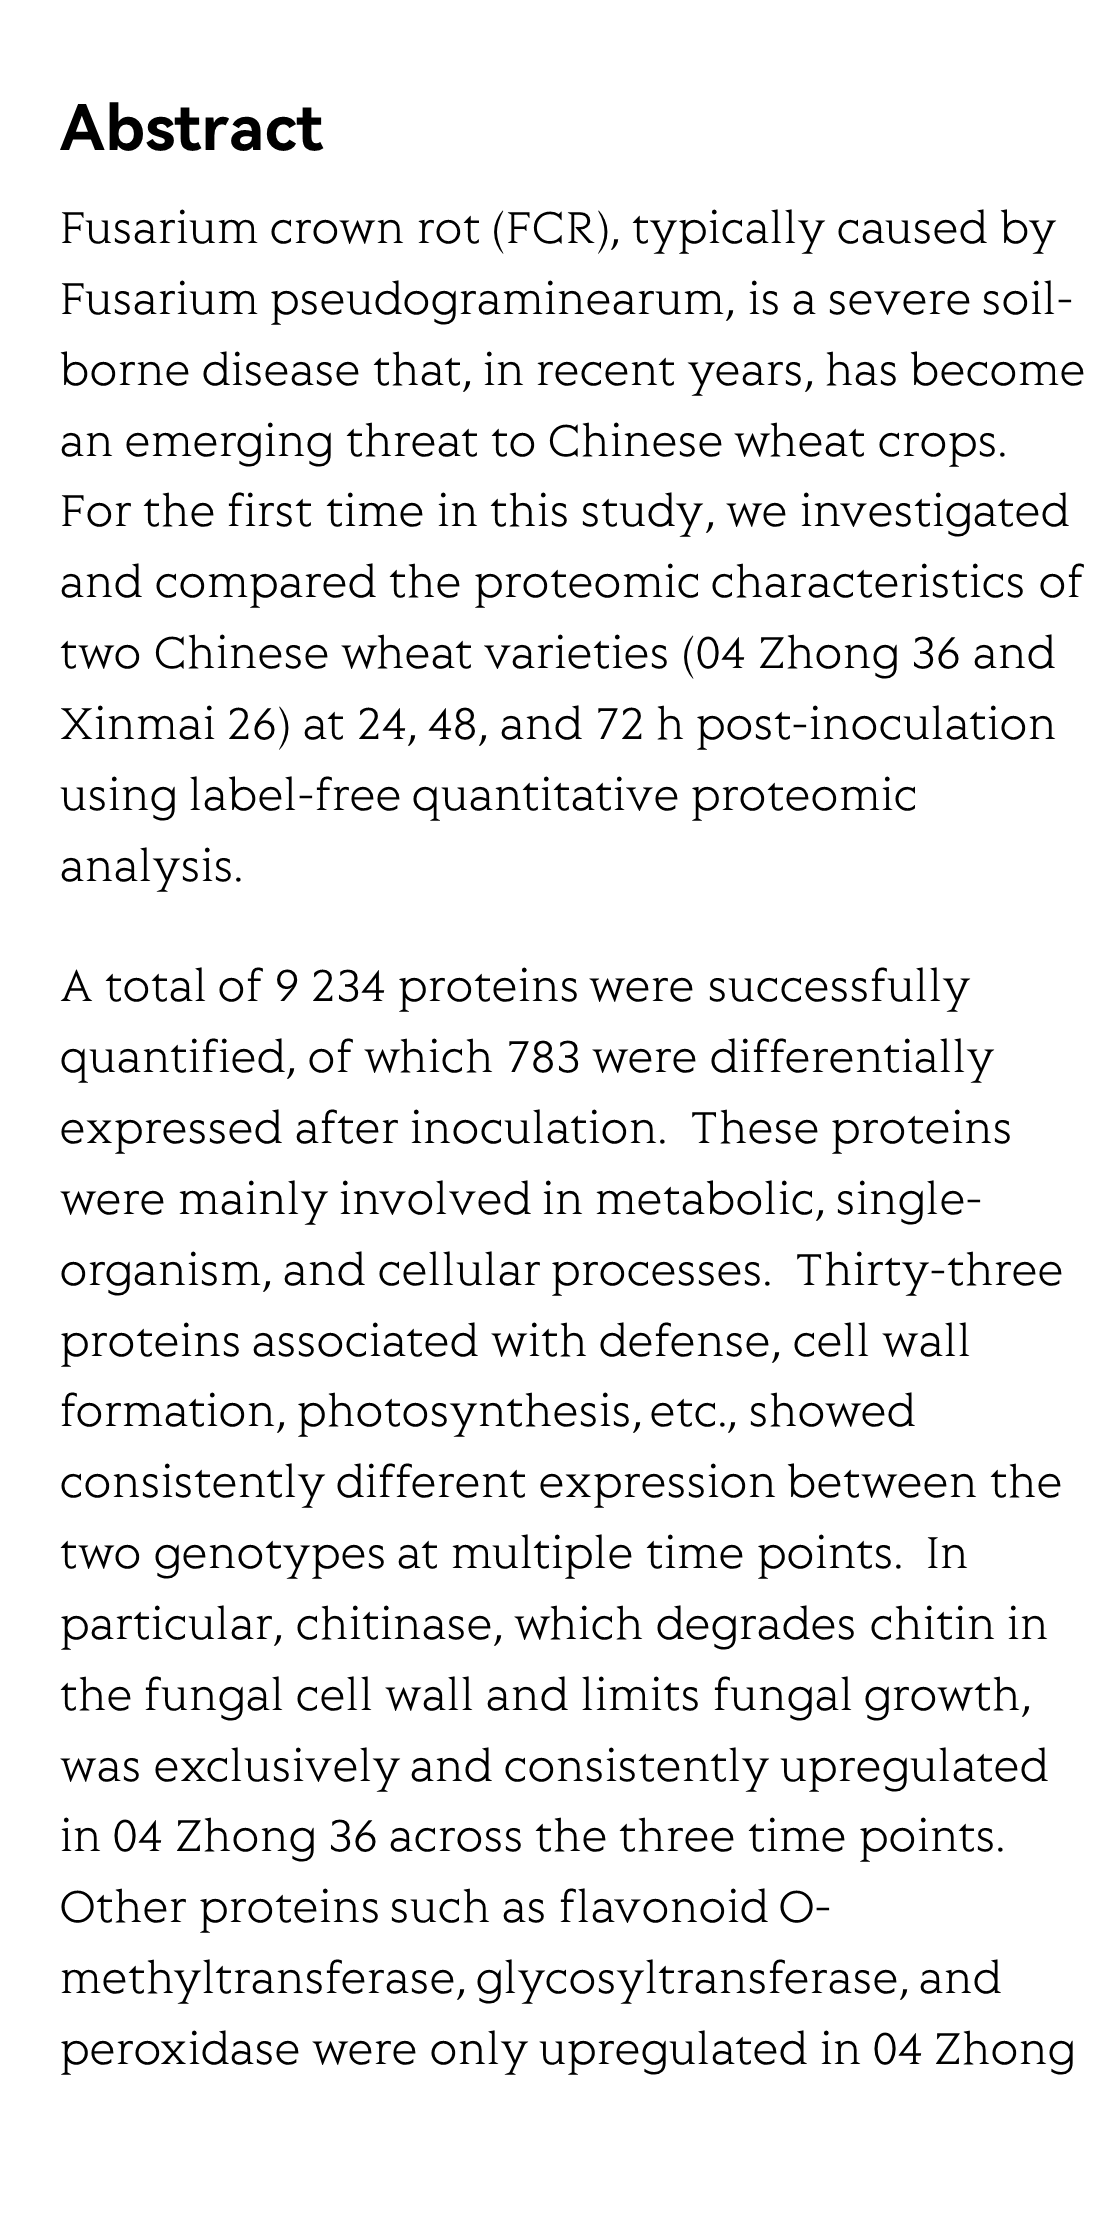 Identification of proteins associated with Fusarium crown rot resistance in wheat using label-free quantification analysis_2